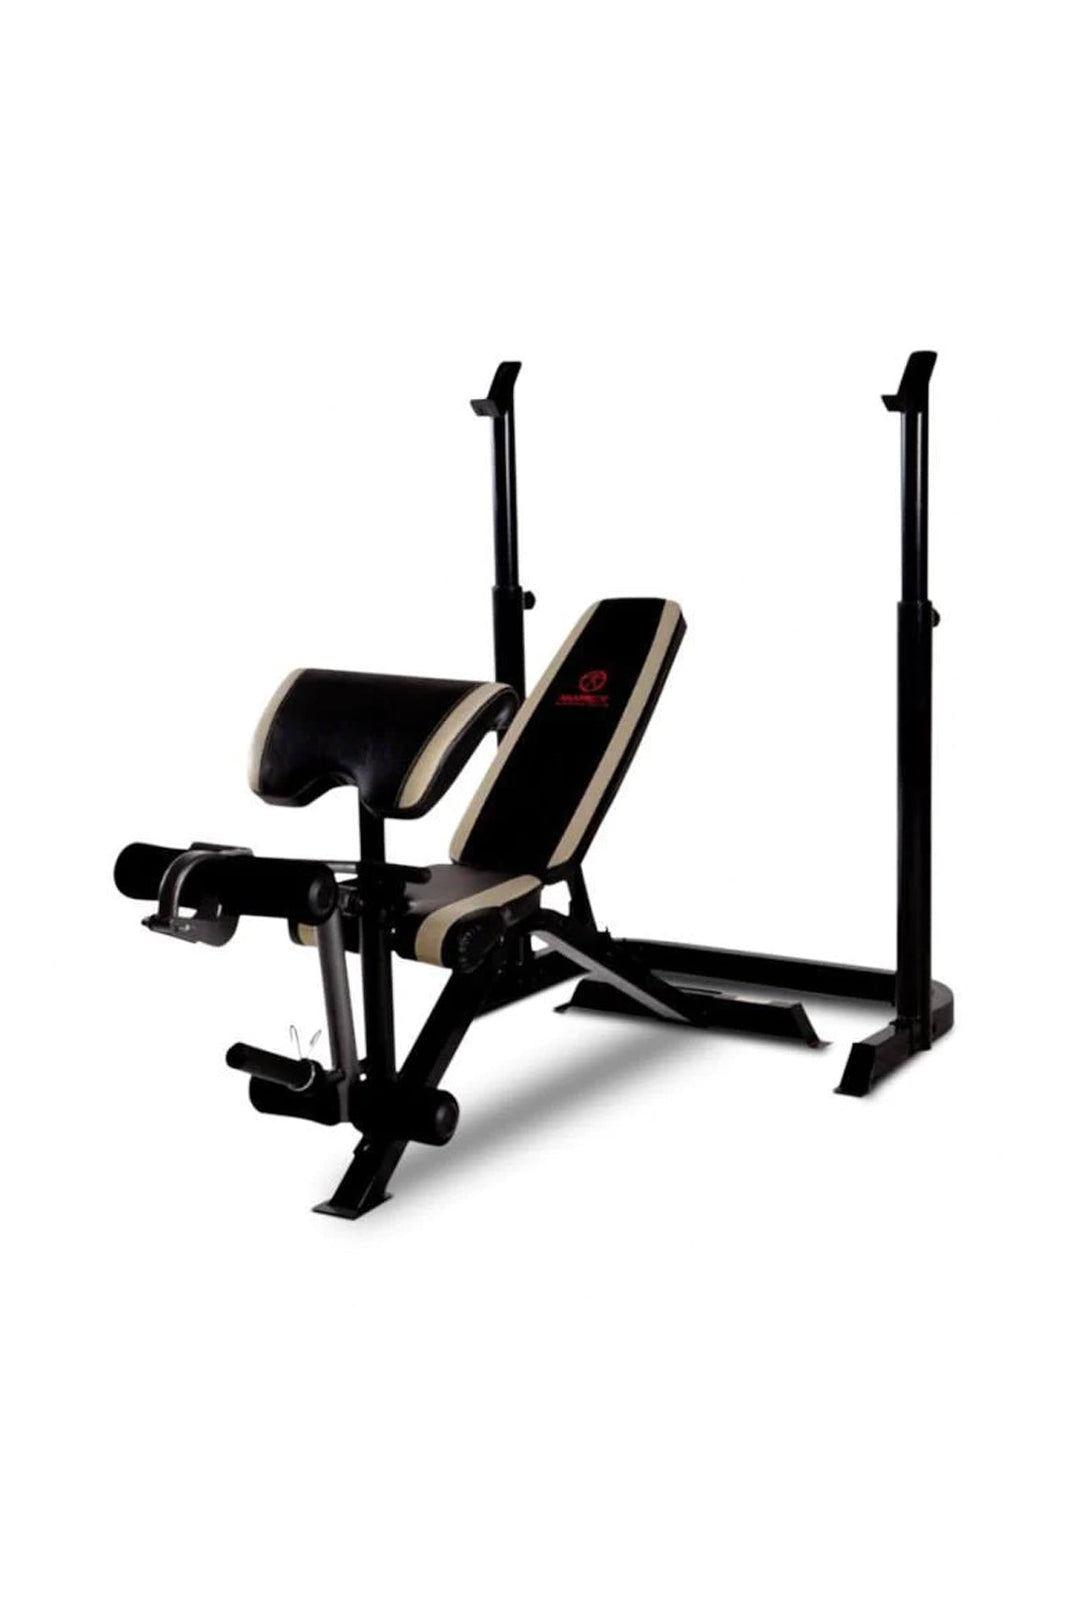 Marcy Strength Weight Bench MD879